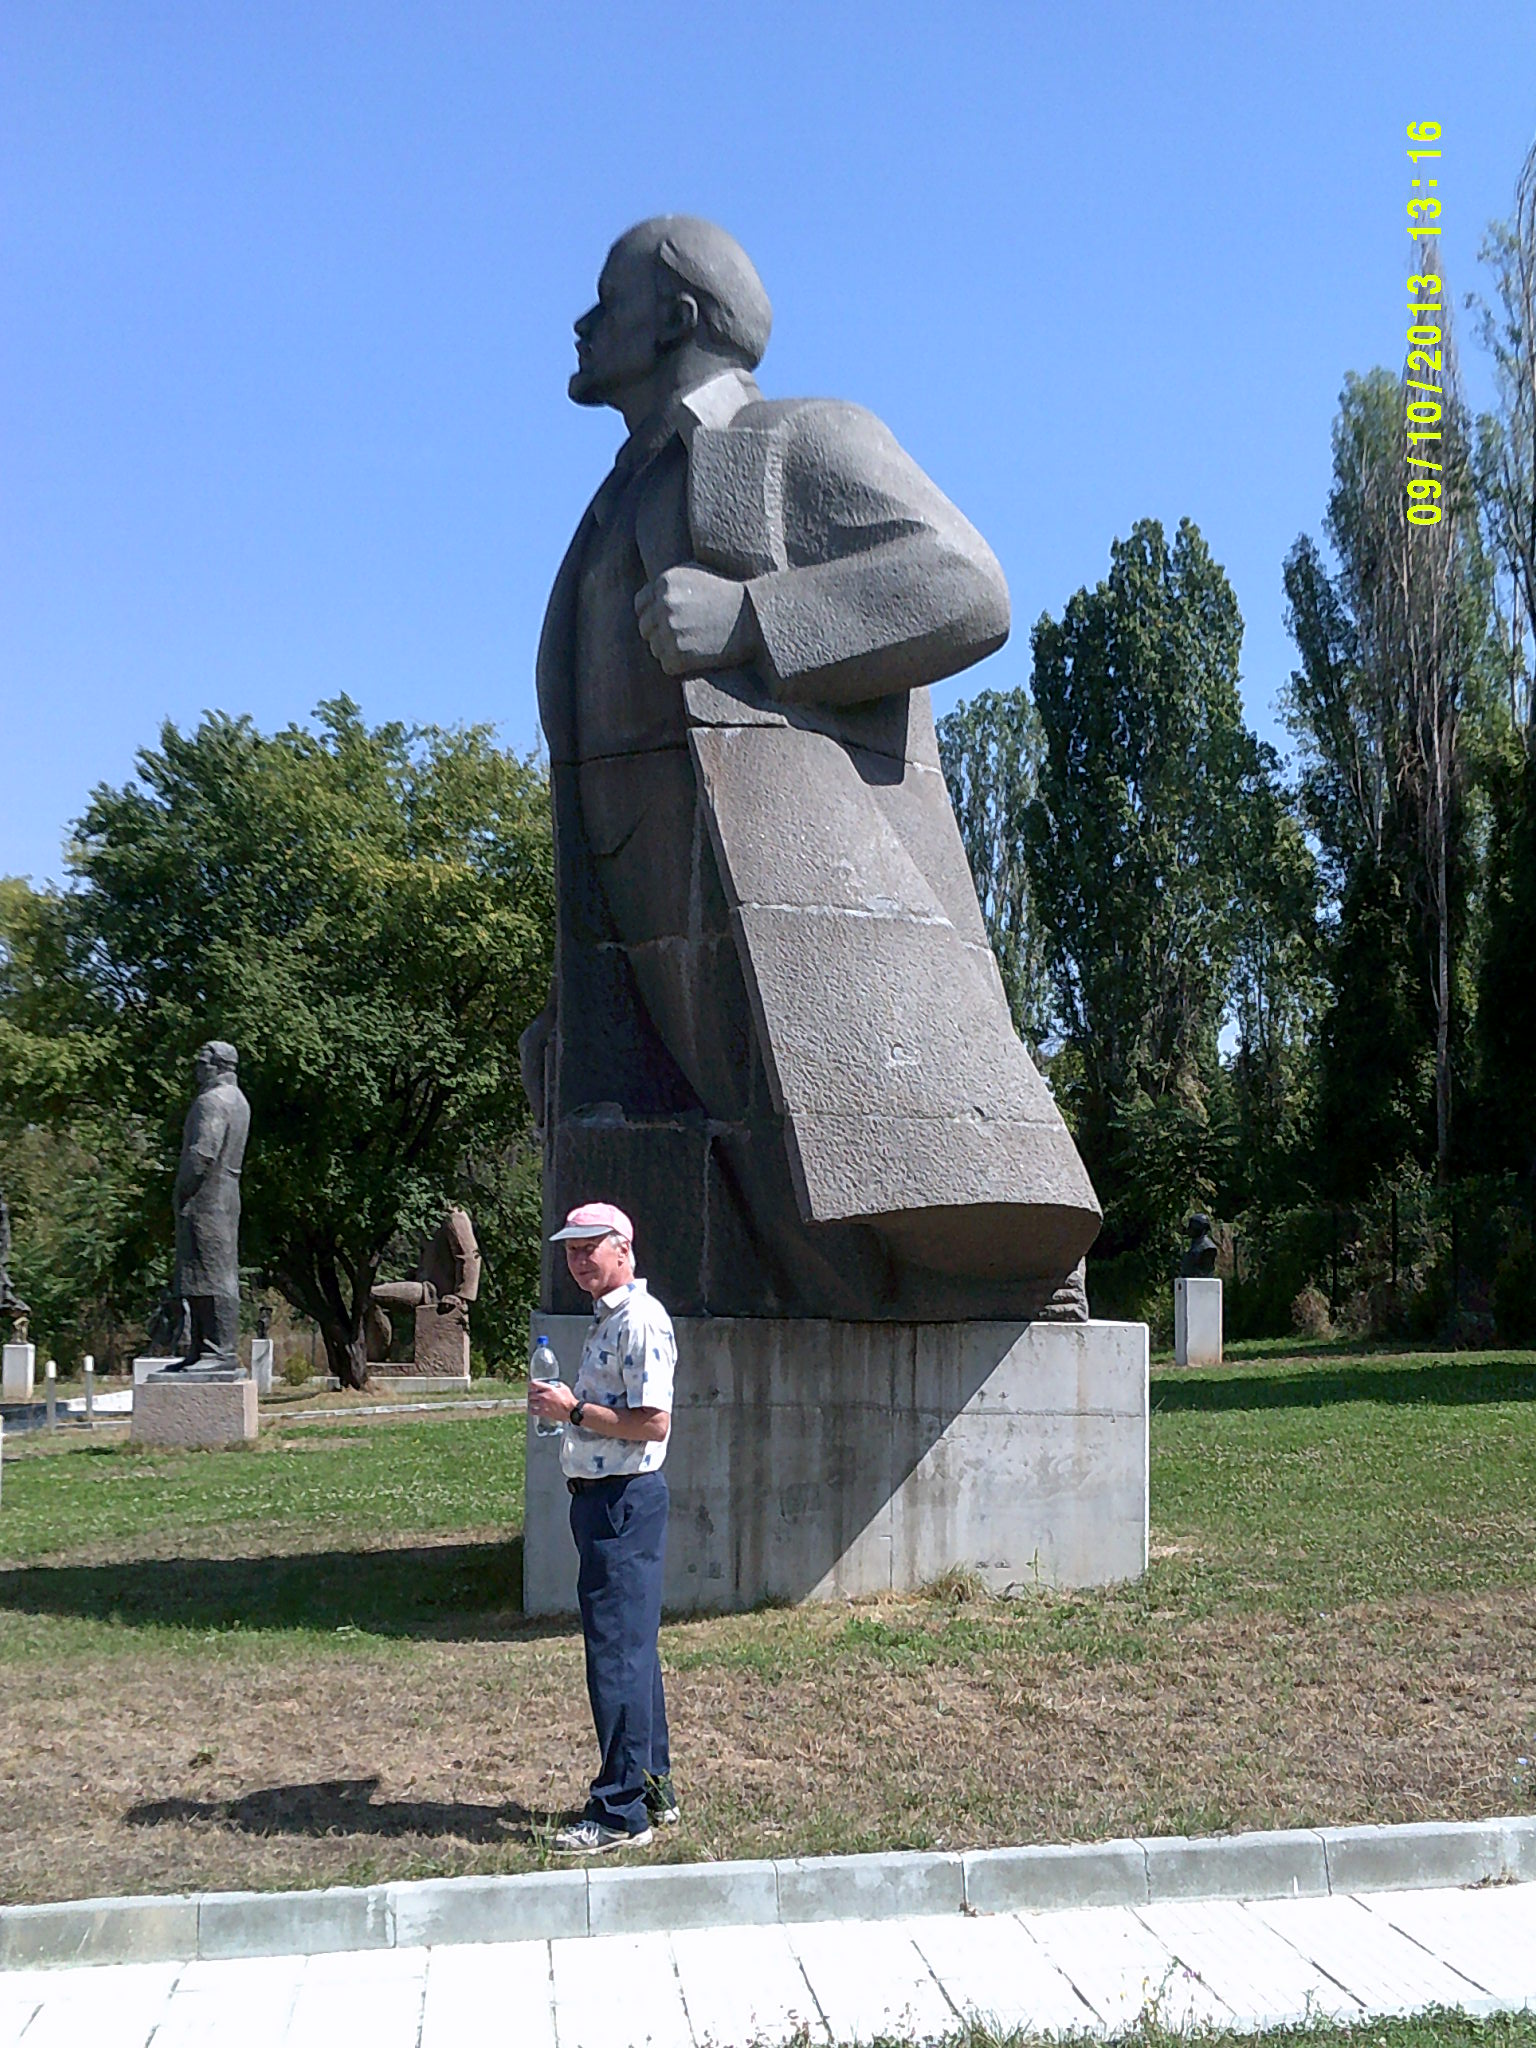 a person standing next to a statue of a man holding soing in his hand